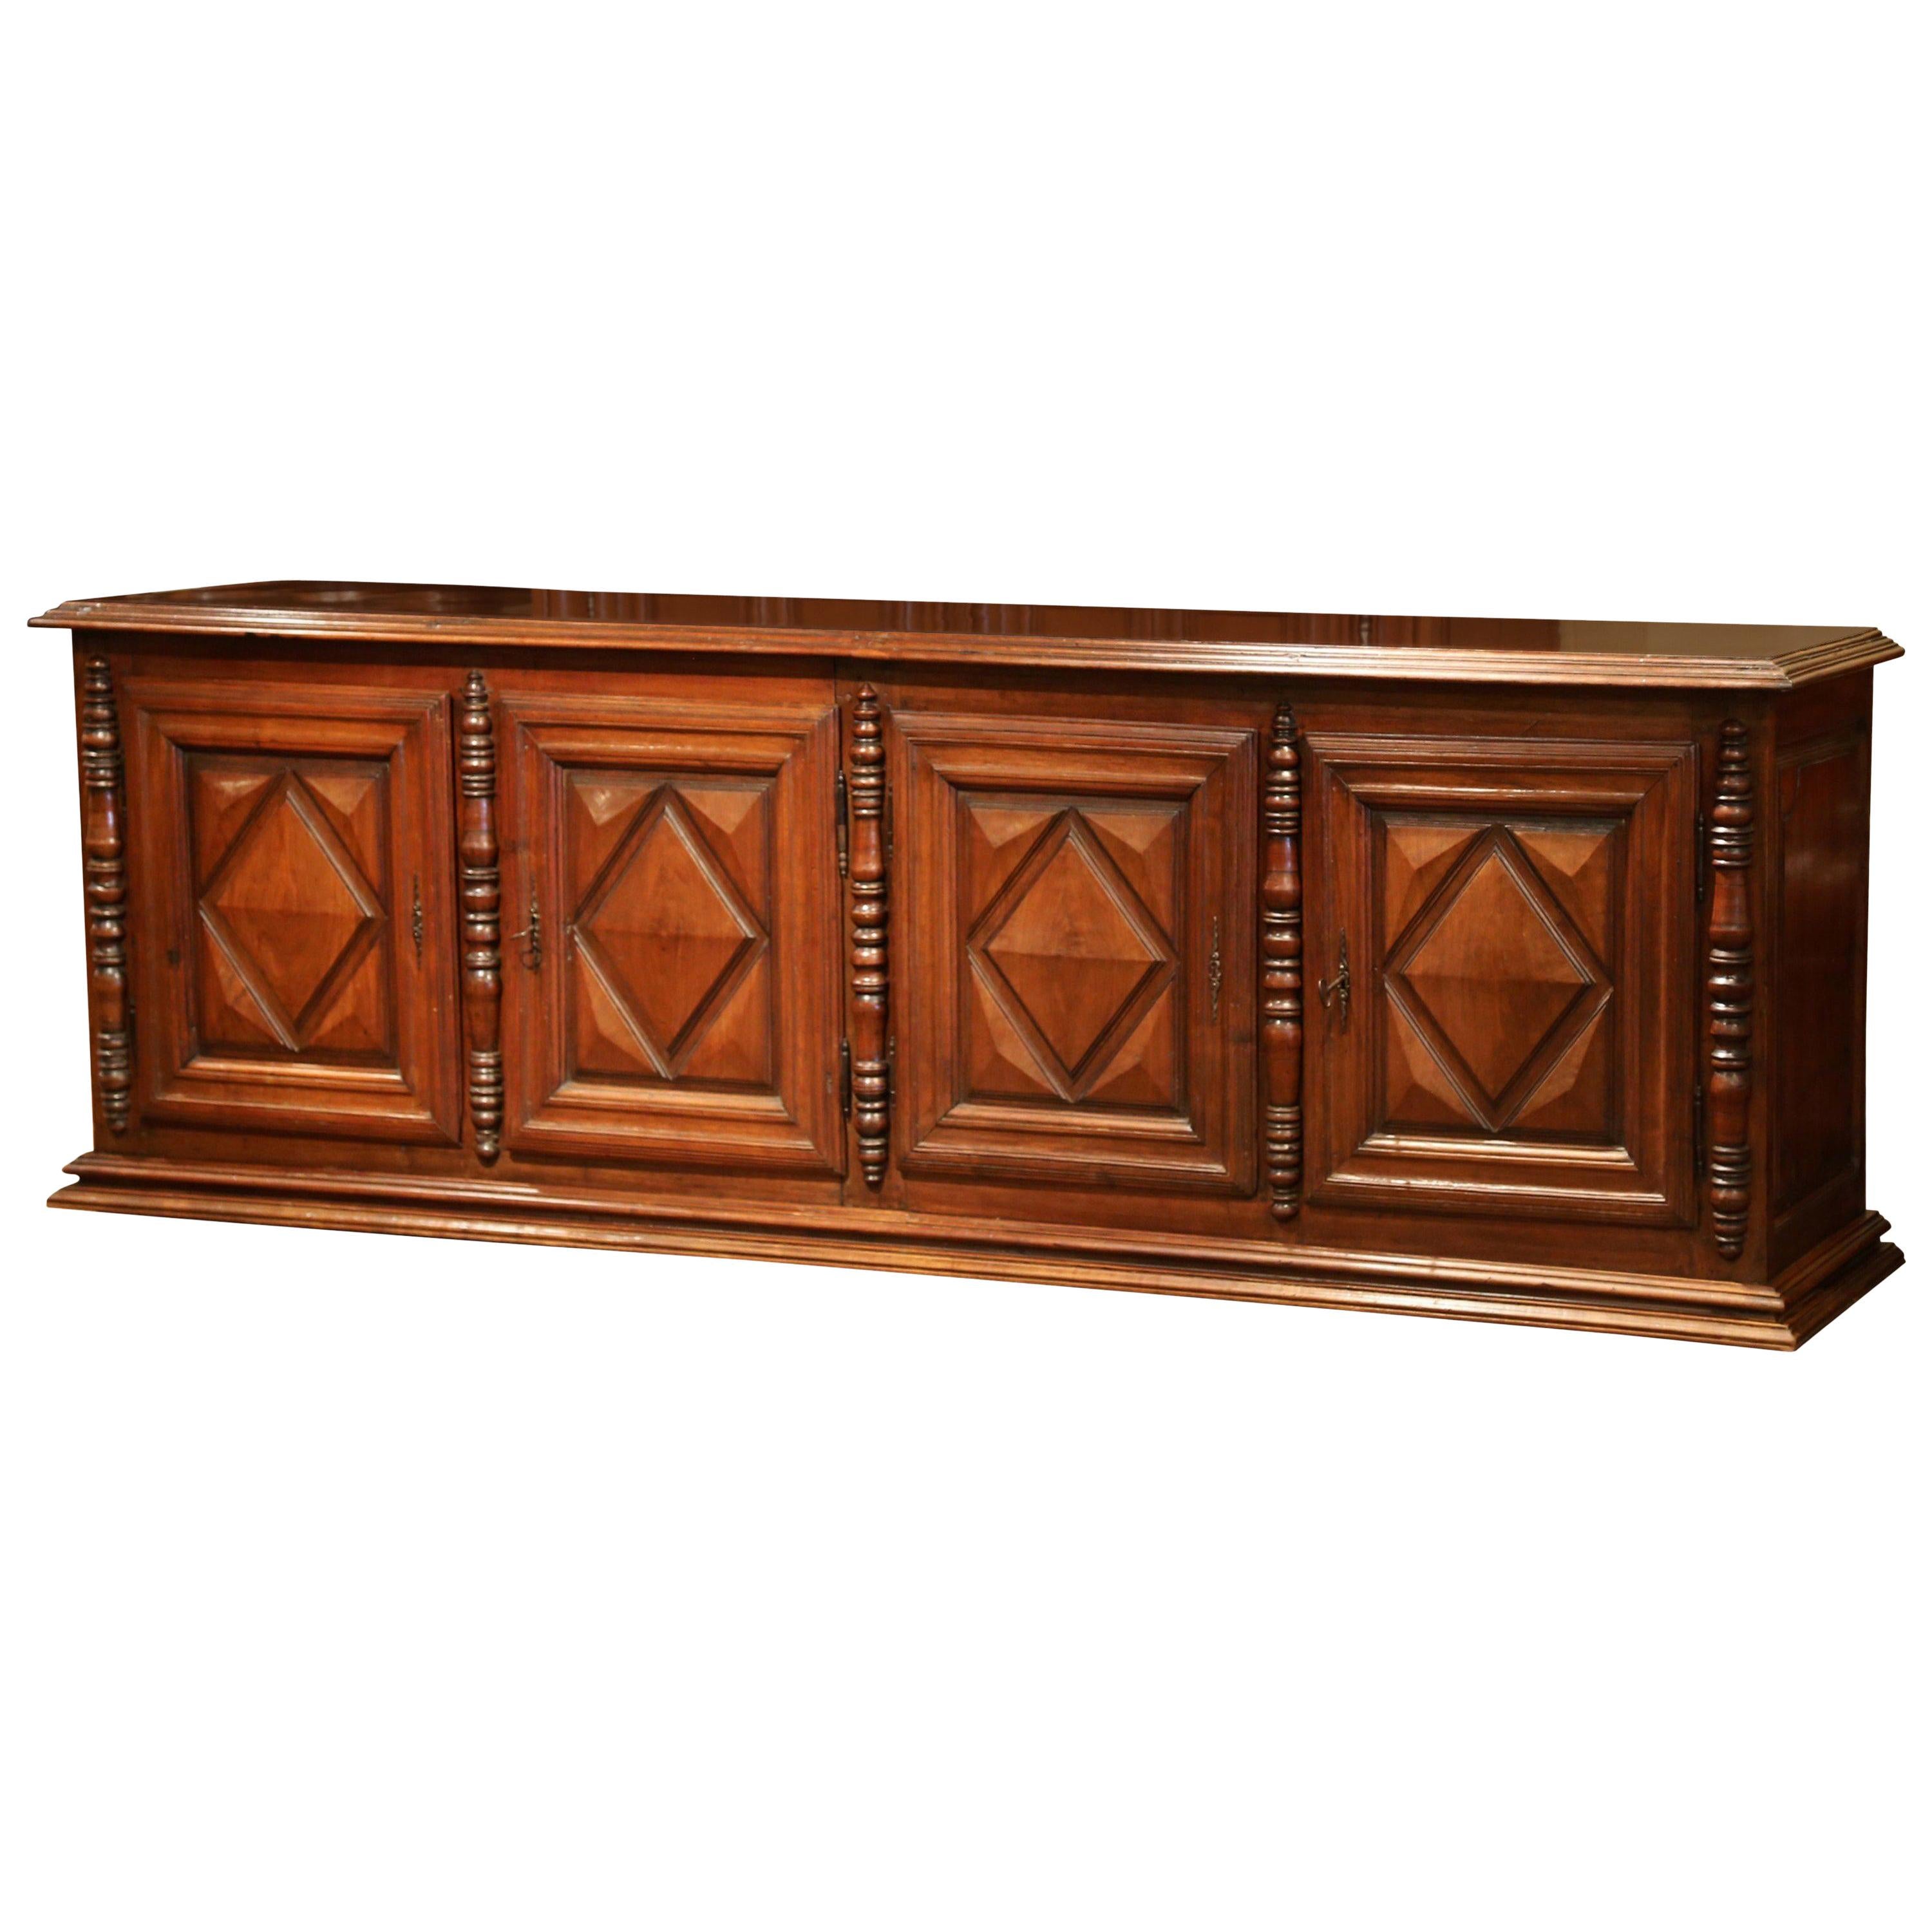 Early 19th Century French Louis XIII Carved Walnut Four-Door Enfilade Buffet